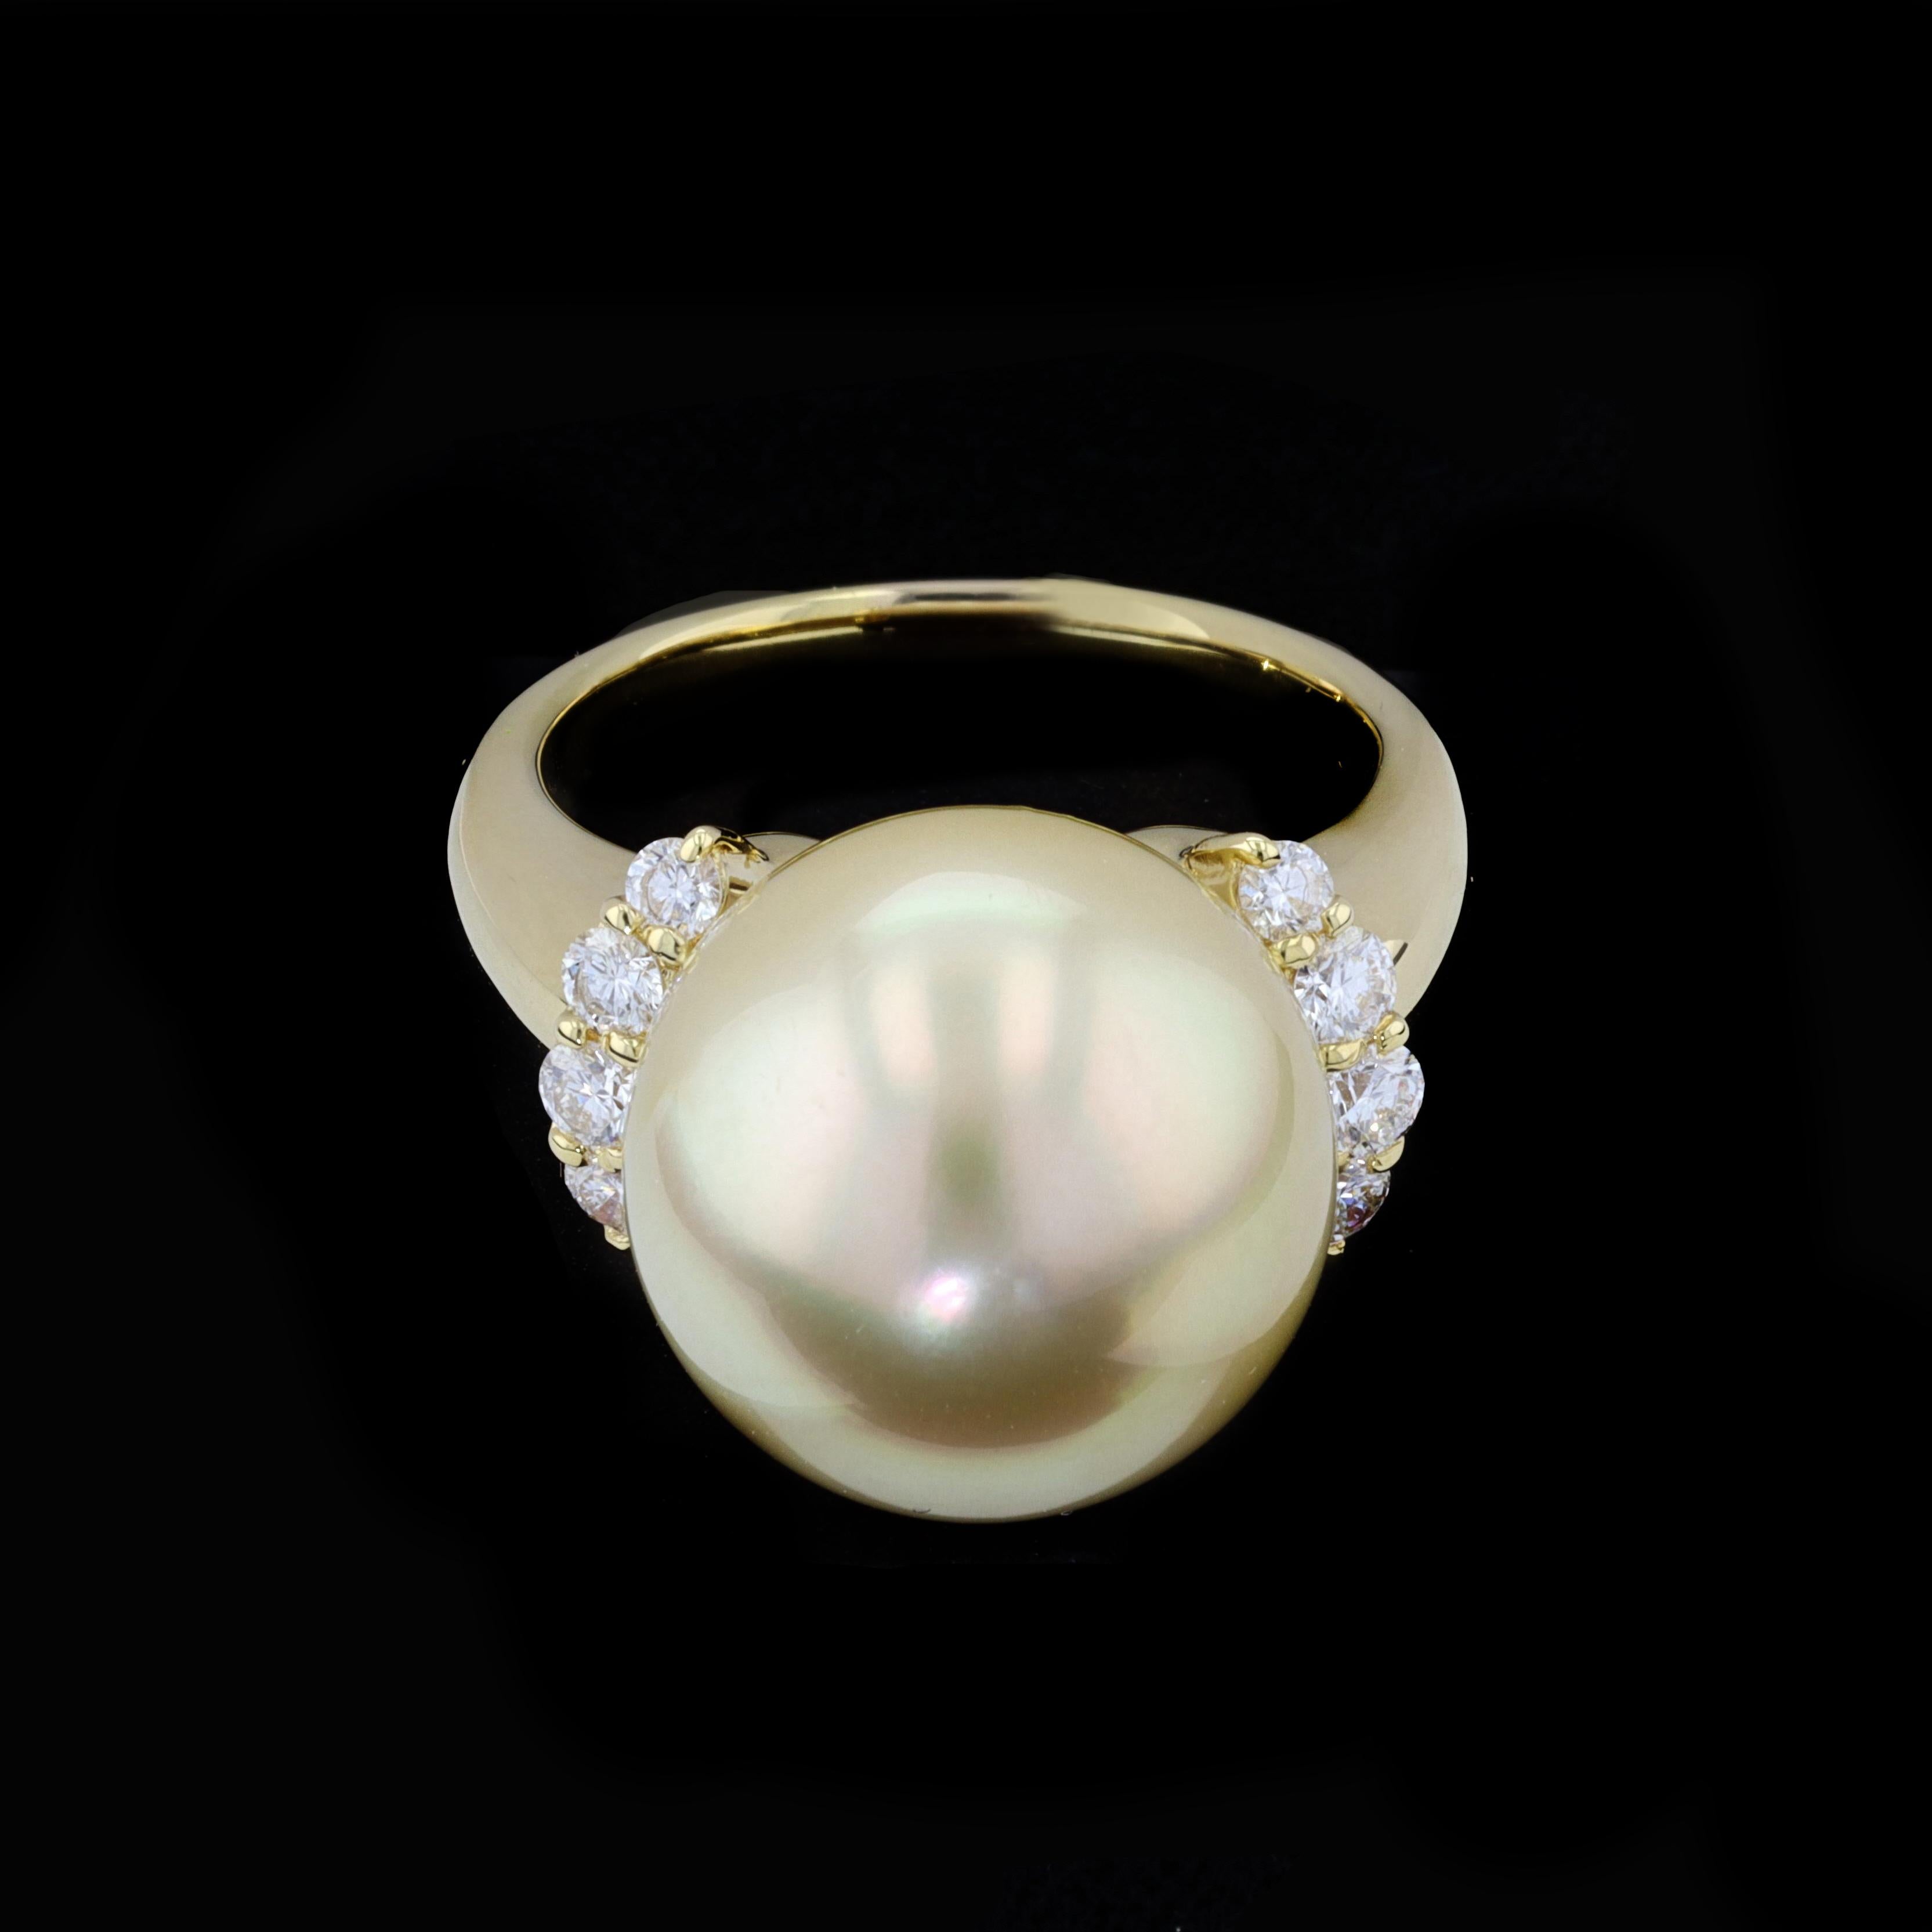 Dive deep and come up for air as this spectacular 18K Yellow Gold South Sea Pearl and Diamond Ring is certain to take your breath away. The ring is centered with a lovely south sea pearl that measures 15mm in diameter accentuated by sparkling round